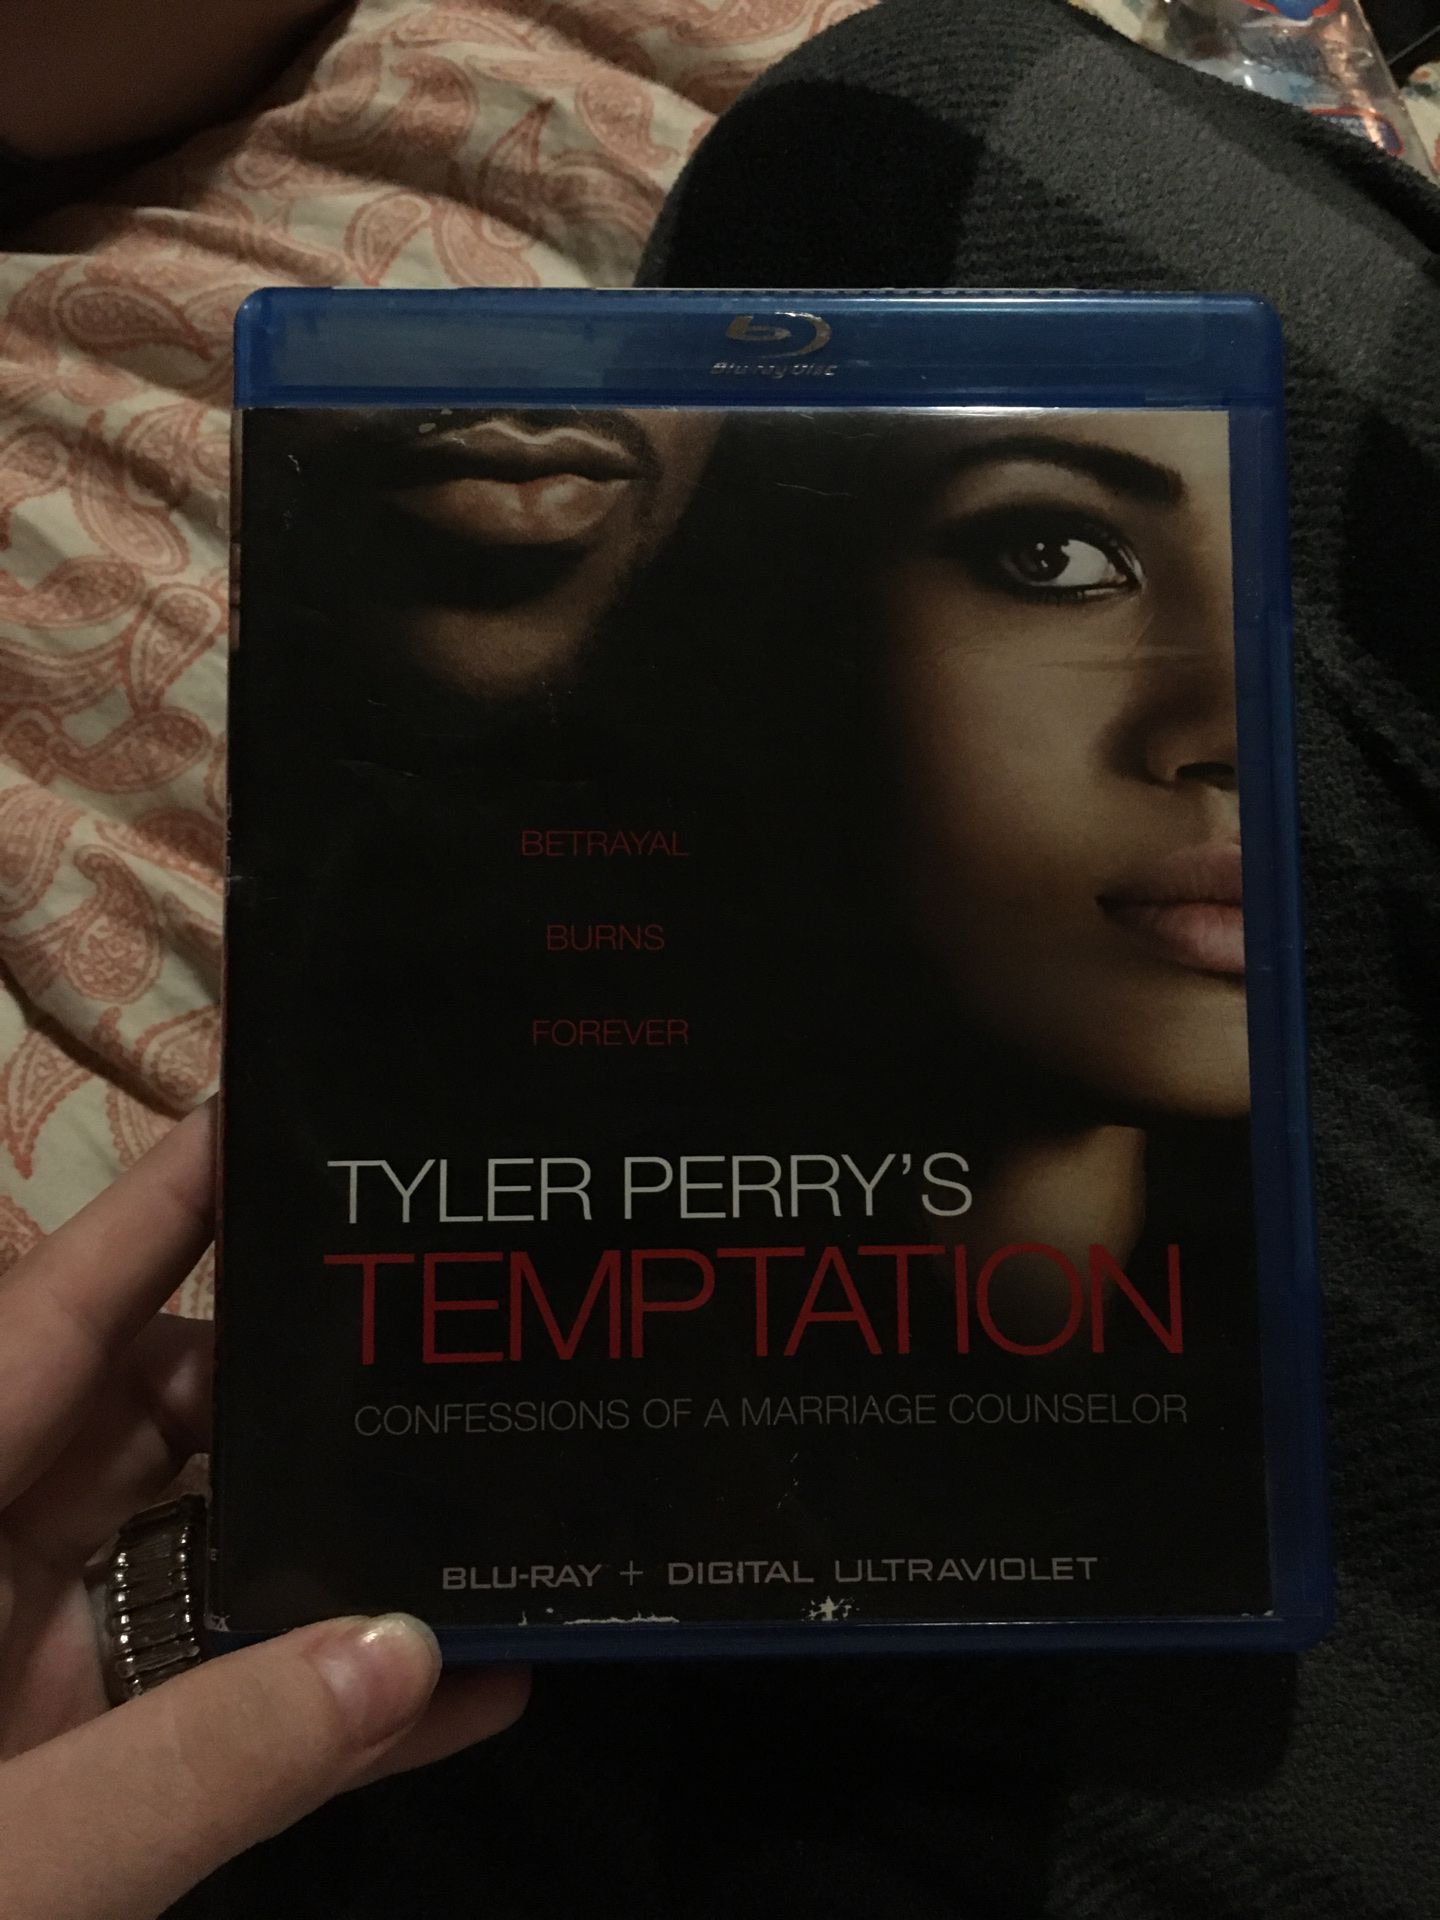 Tyler Perrys Temptation: Confessions of a marriage counselor